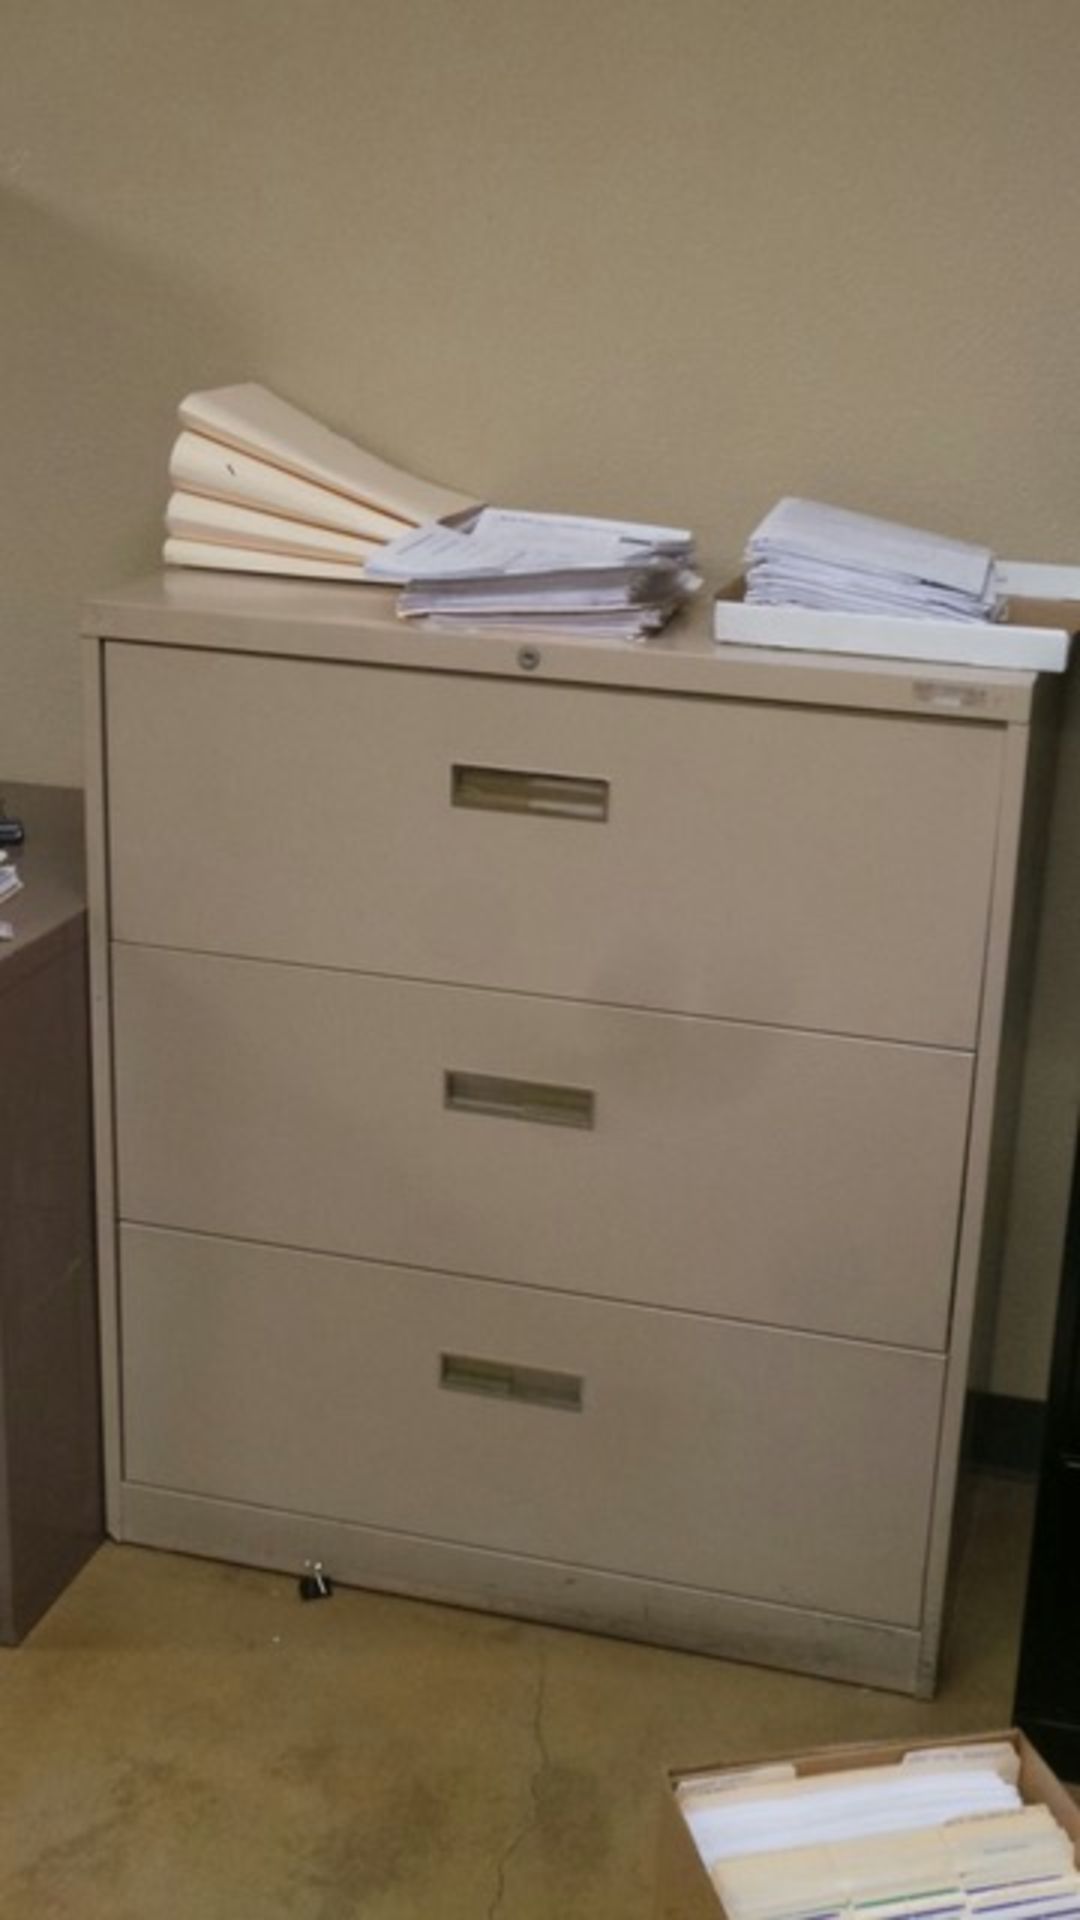 File Cabinets - Image 6 of 11